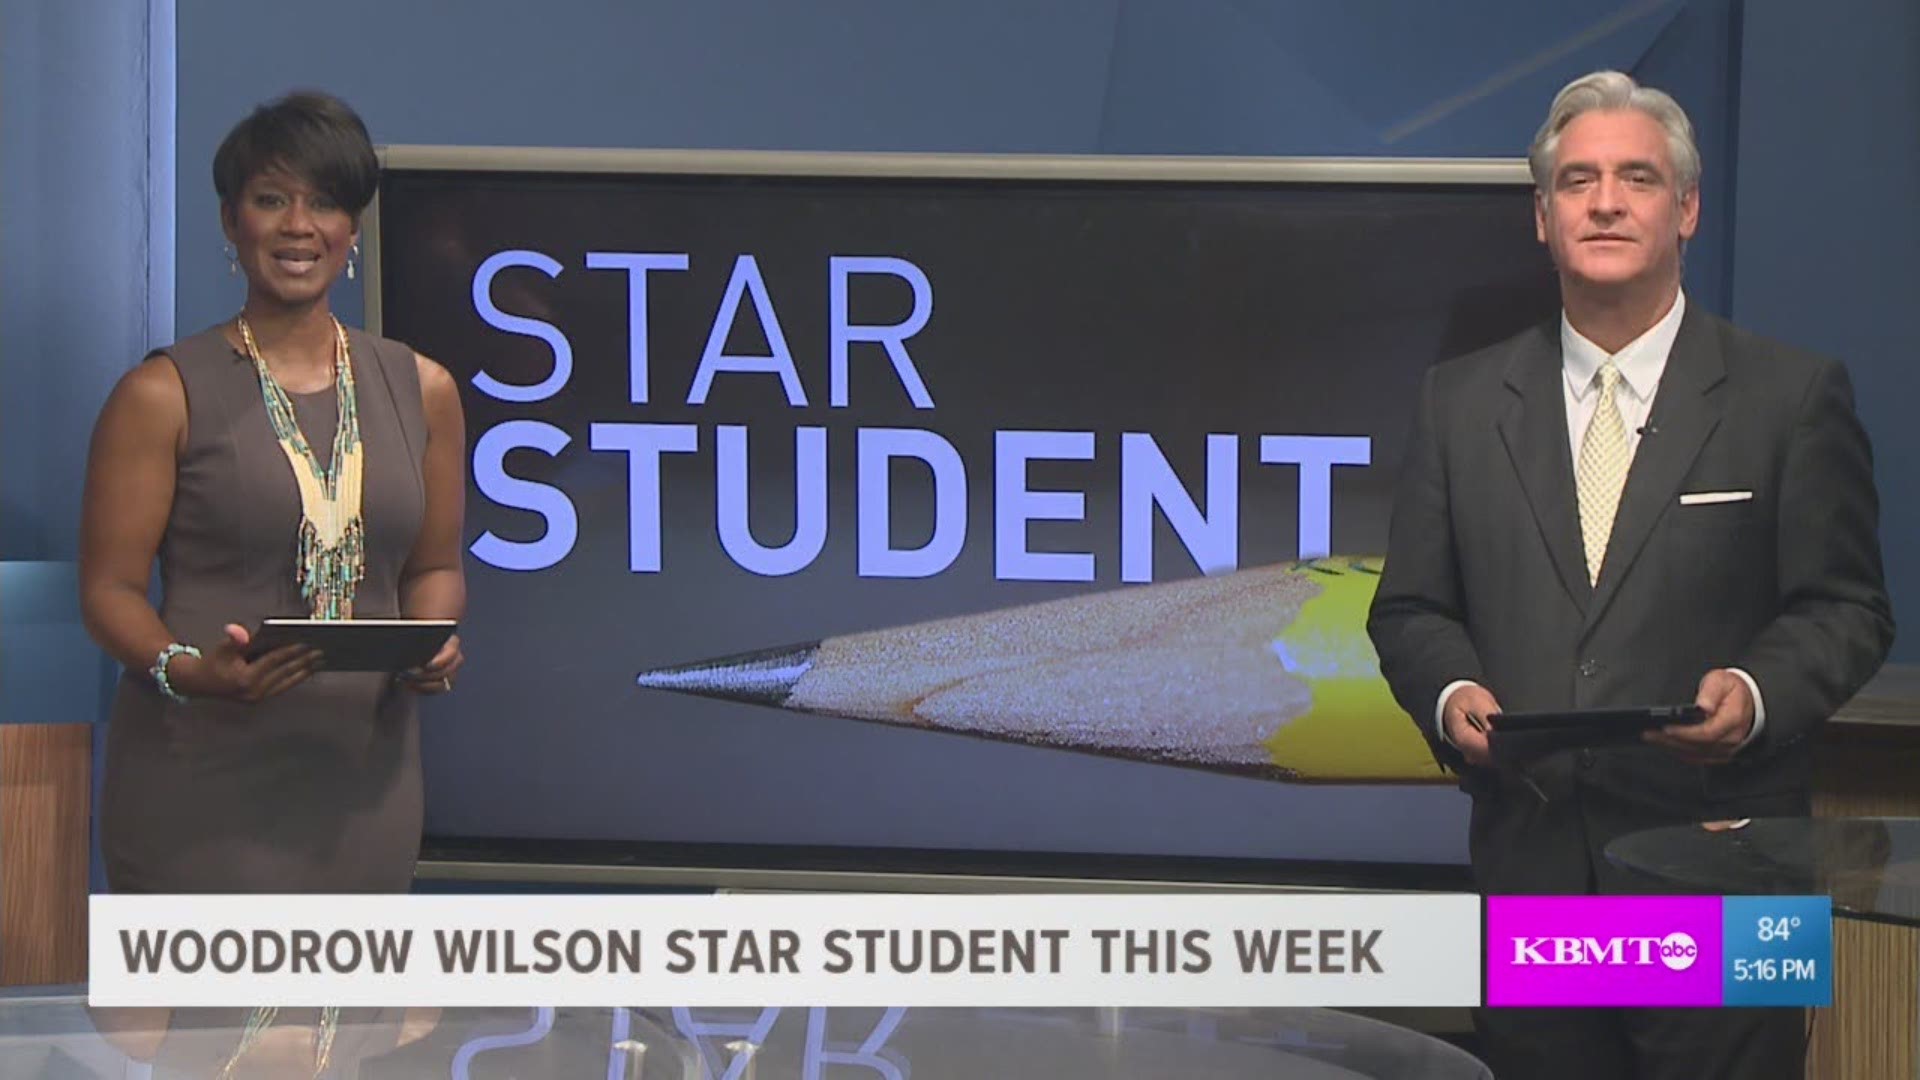 Cameron Lewis is a 9th grader at Woodrow Wilson Early College High School and was chosen as the 12News Star Student for his need to learn.